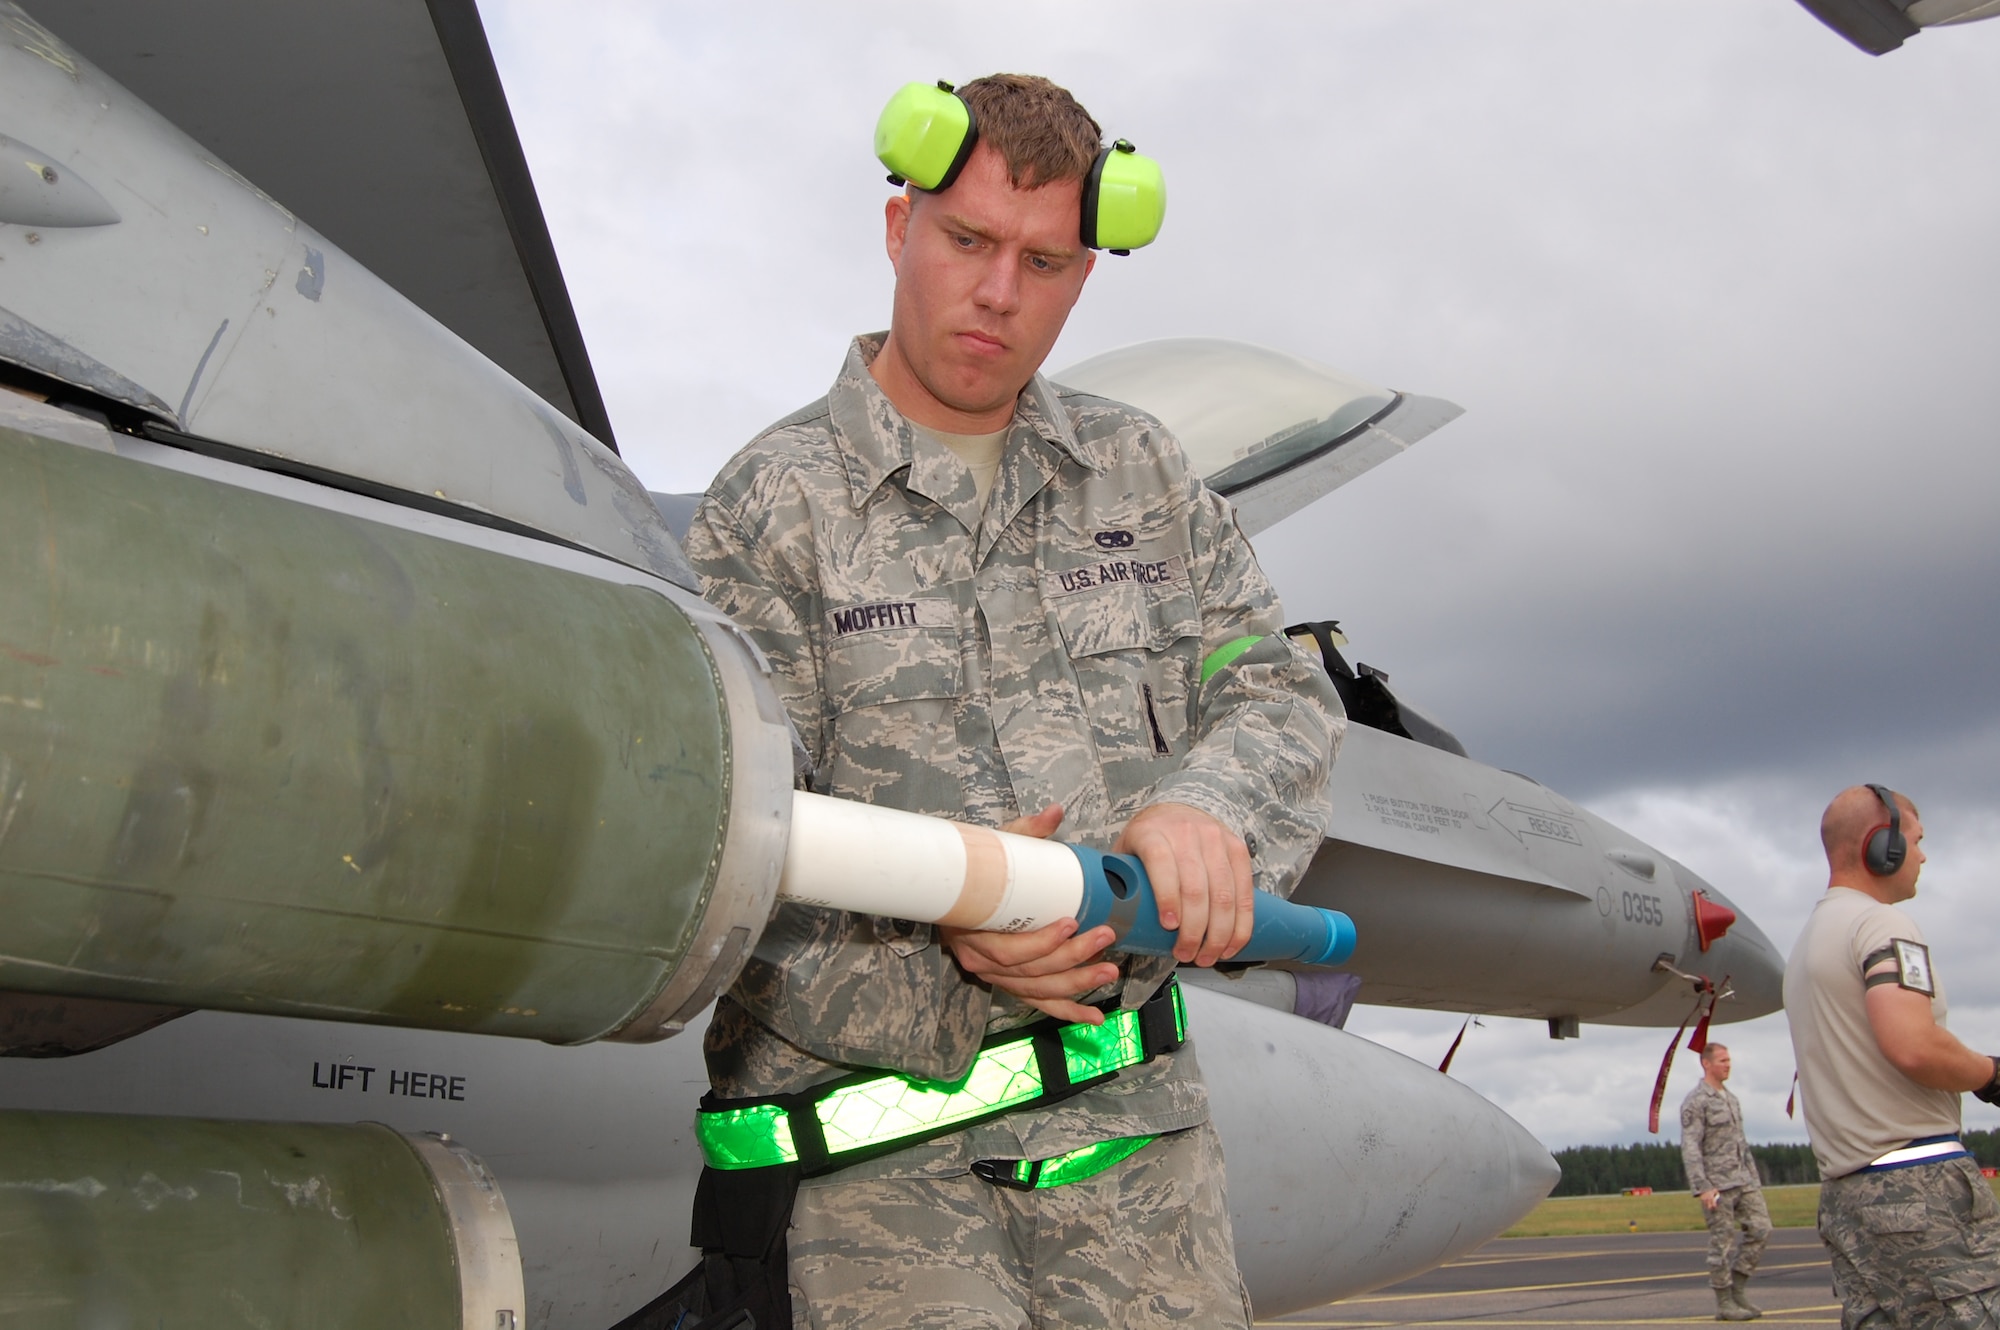 Staff Sgt. Jared Moffitt, 31st Aircraft Maintenance Squadron weapons load crew member, loads practice munitions onto an F-16 Aug. 5, 2010 during a training exercise at Kallax Air Base, Sweden. The 555th FS spent two weeks working with the Swedish air force at Norrbotten Wing conducting air-to-air and air-to-ground training missions. (U.S. Air Force photo by Tech. Sgt. Lindsey Maurice/Released)